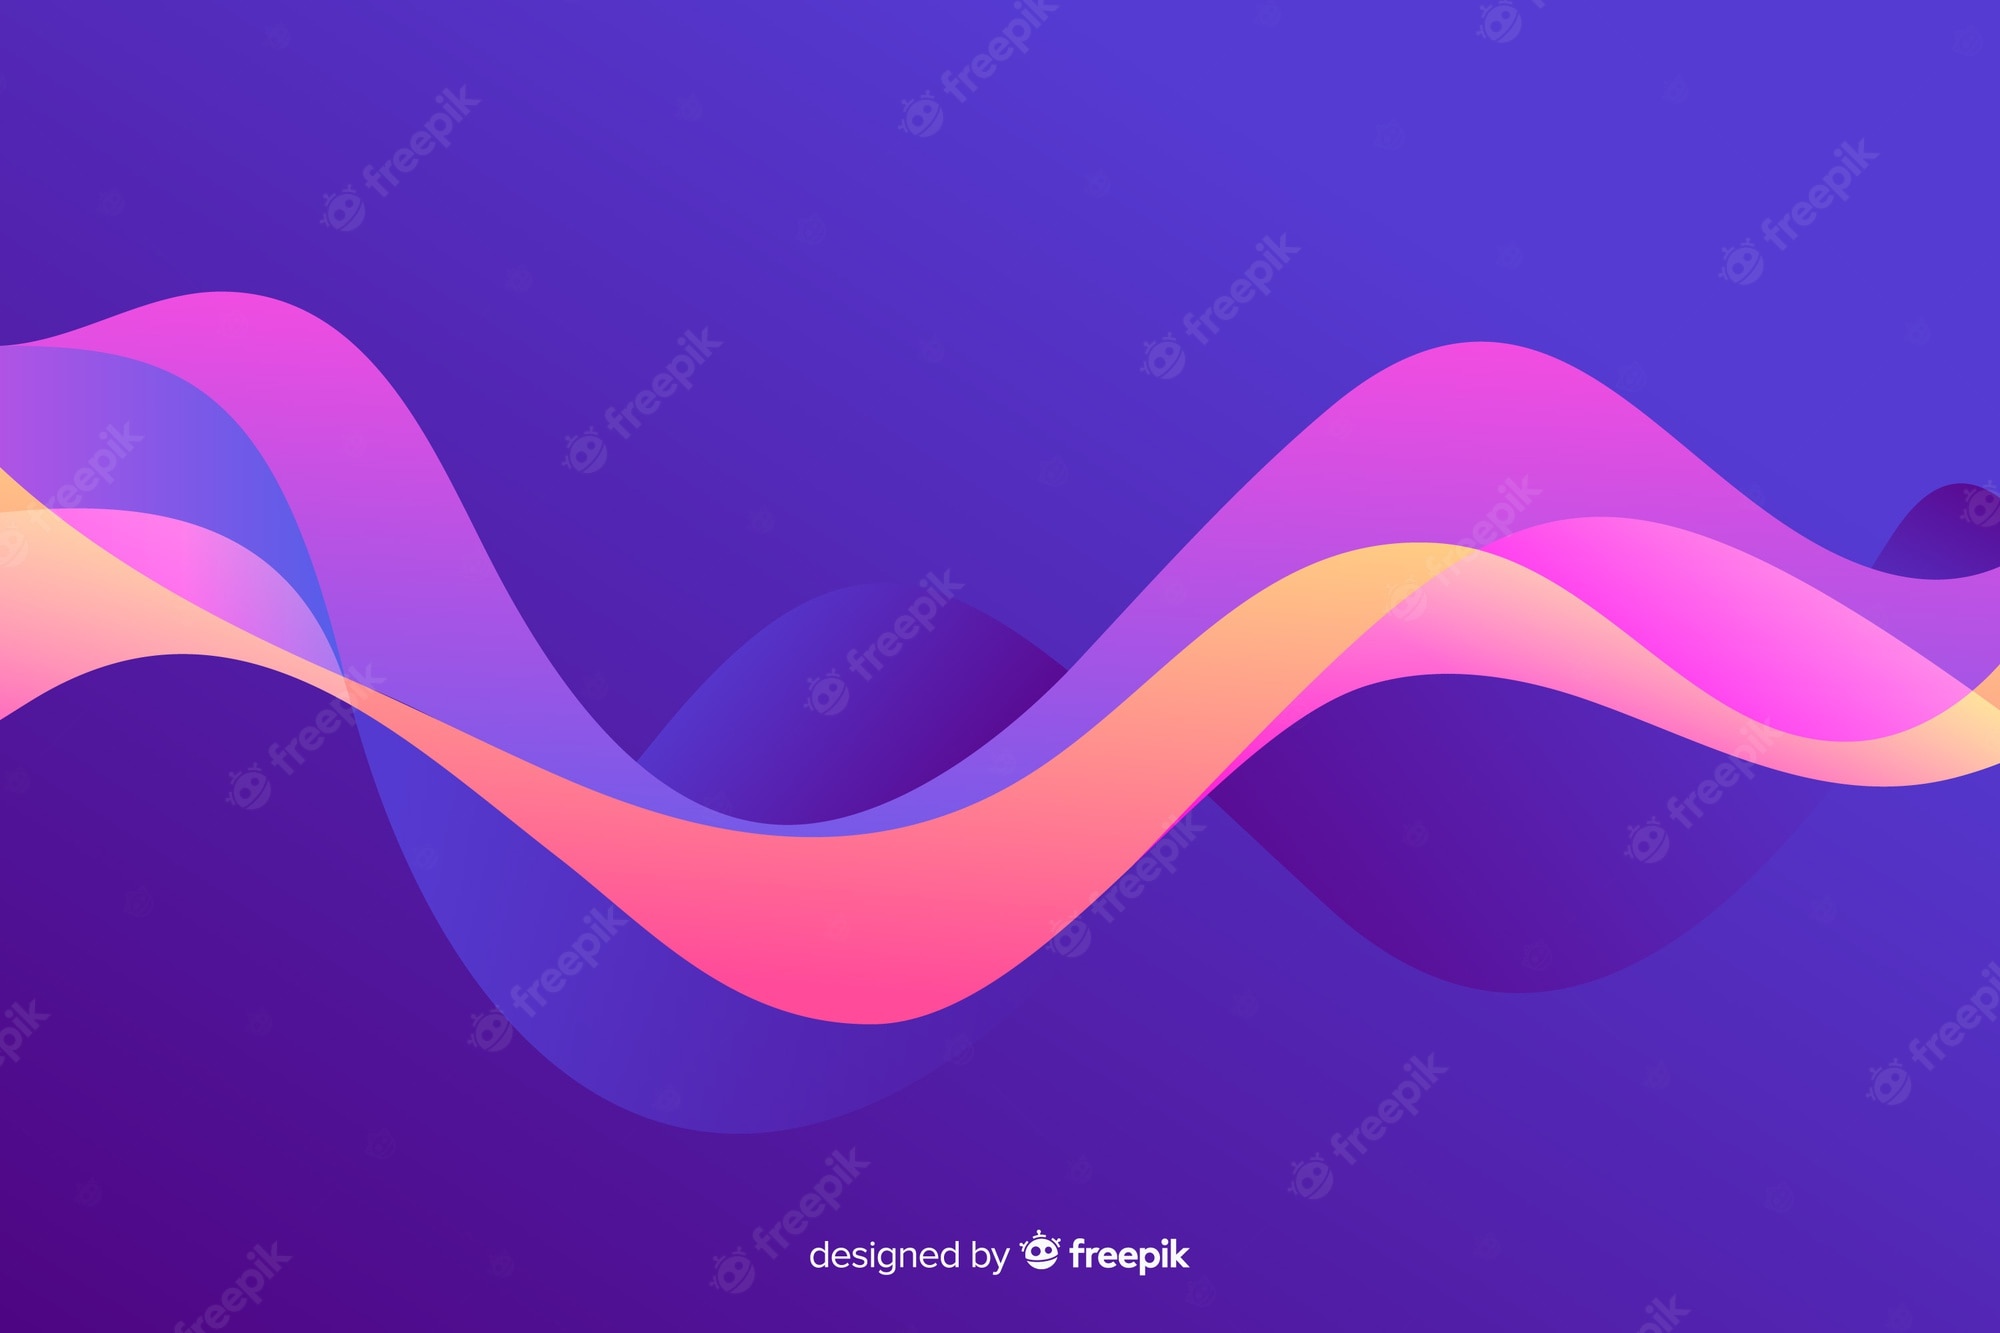 Sound Waves Live Wallpapers